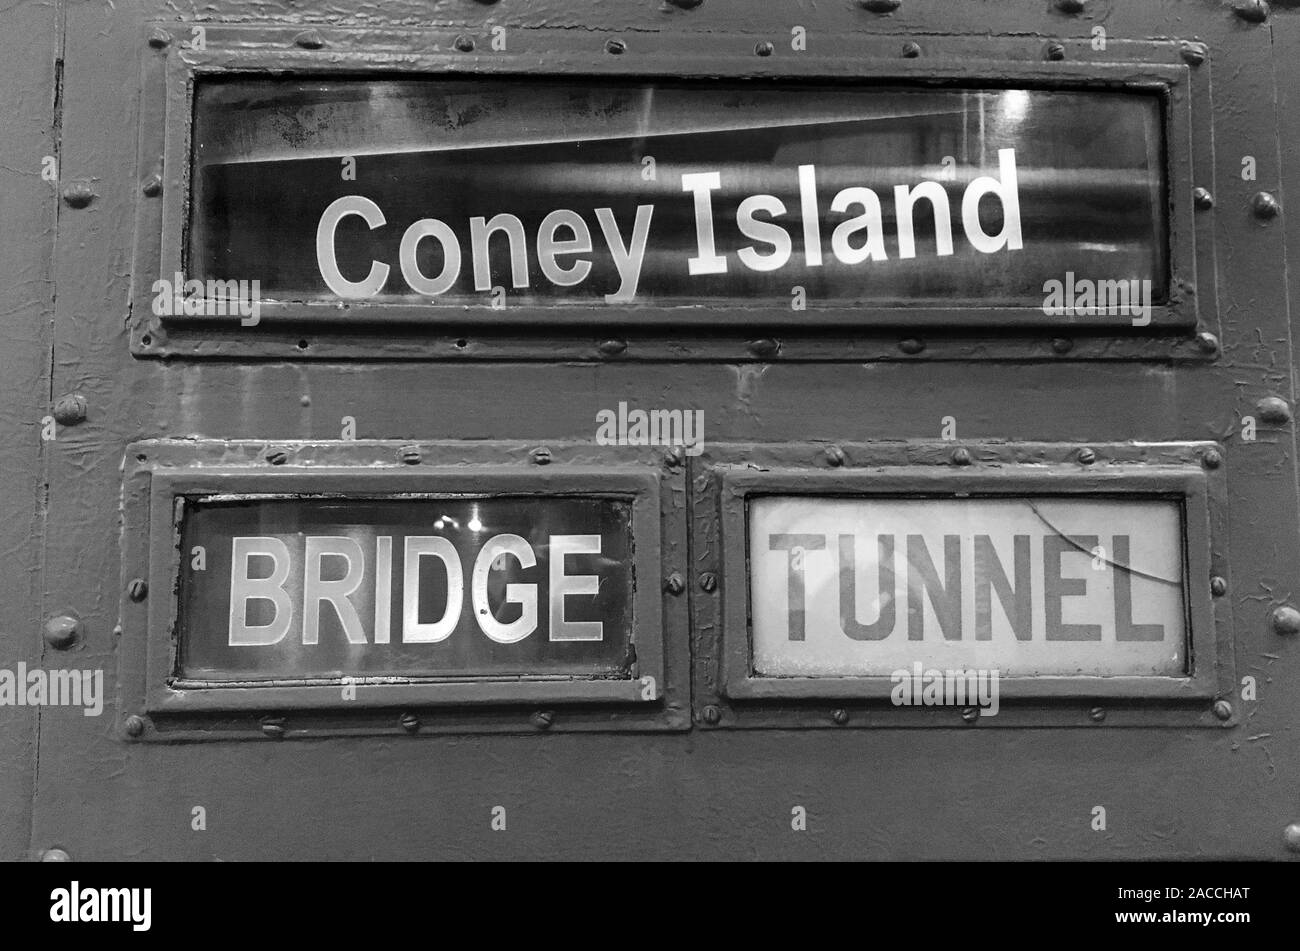 New York City Subway sign for Coney Island via bridge or tunnel circa 1970. NYC has the largest rapid transport system in the World with 472 stations Stock Photo